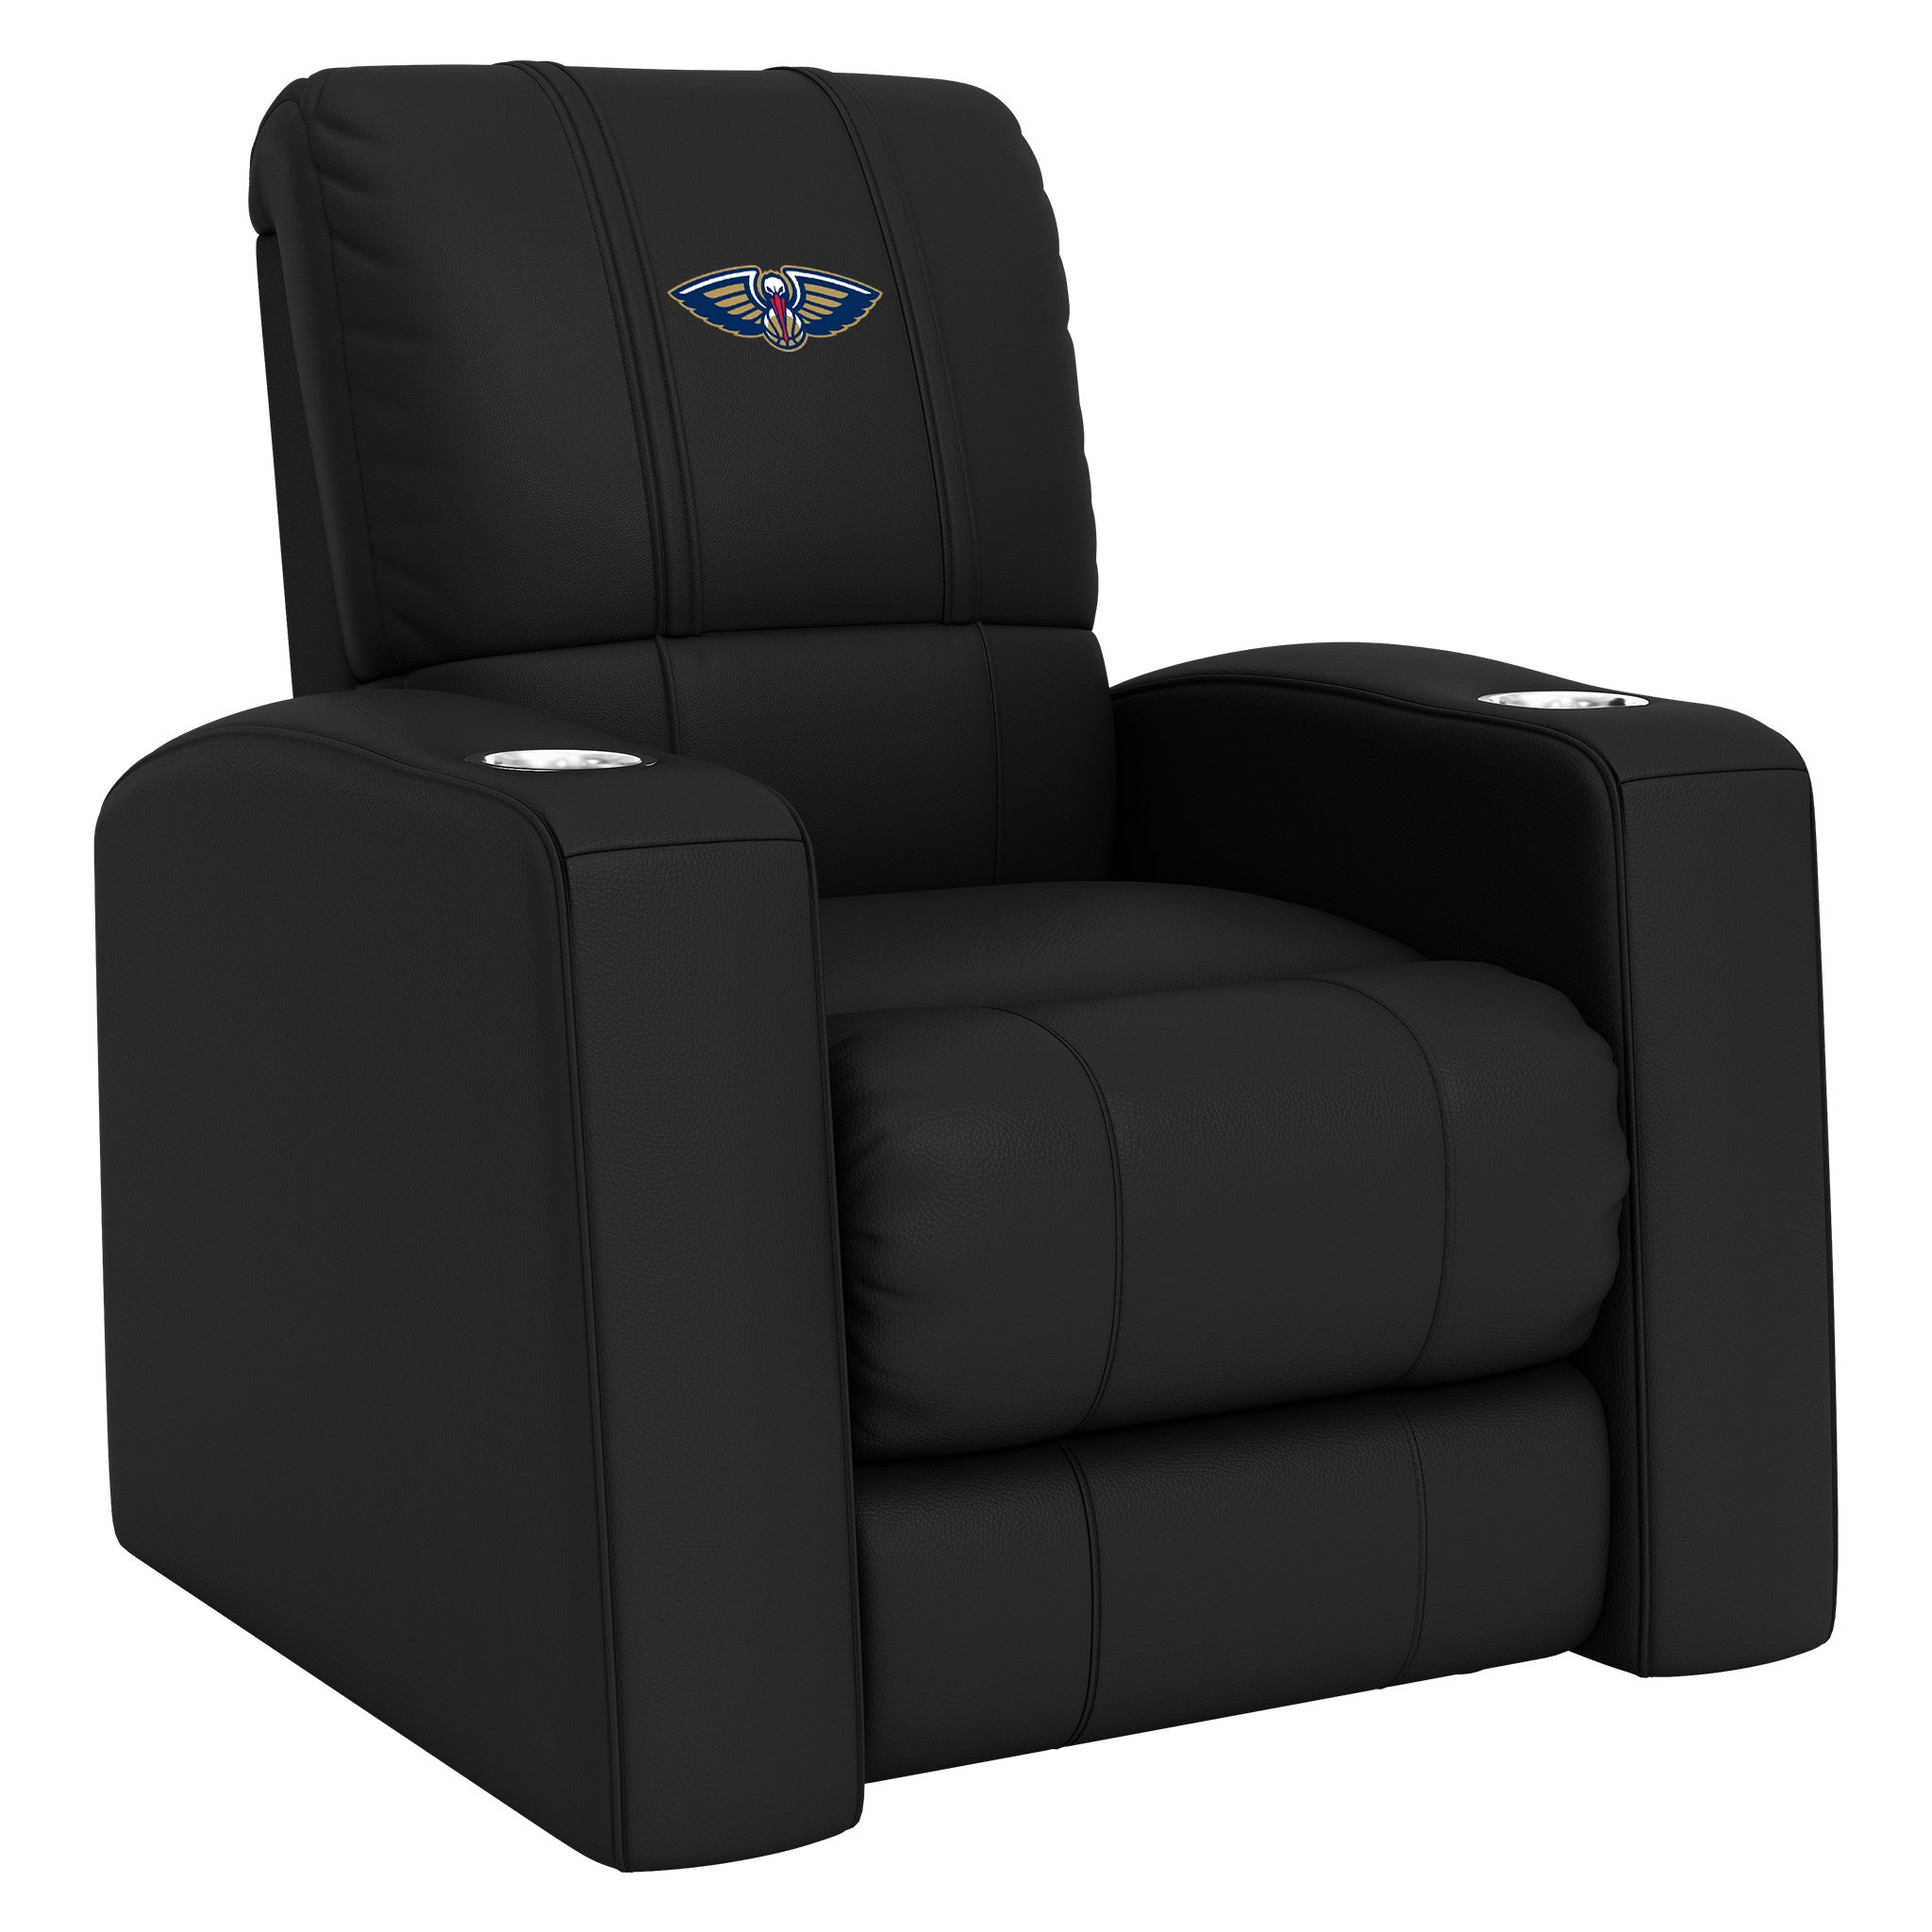 New Orleans Pelicans Home Theater Recliner with New Orleans Pelicans Primary Logo